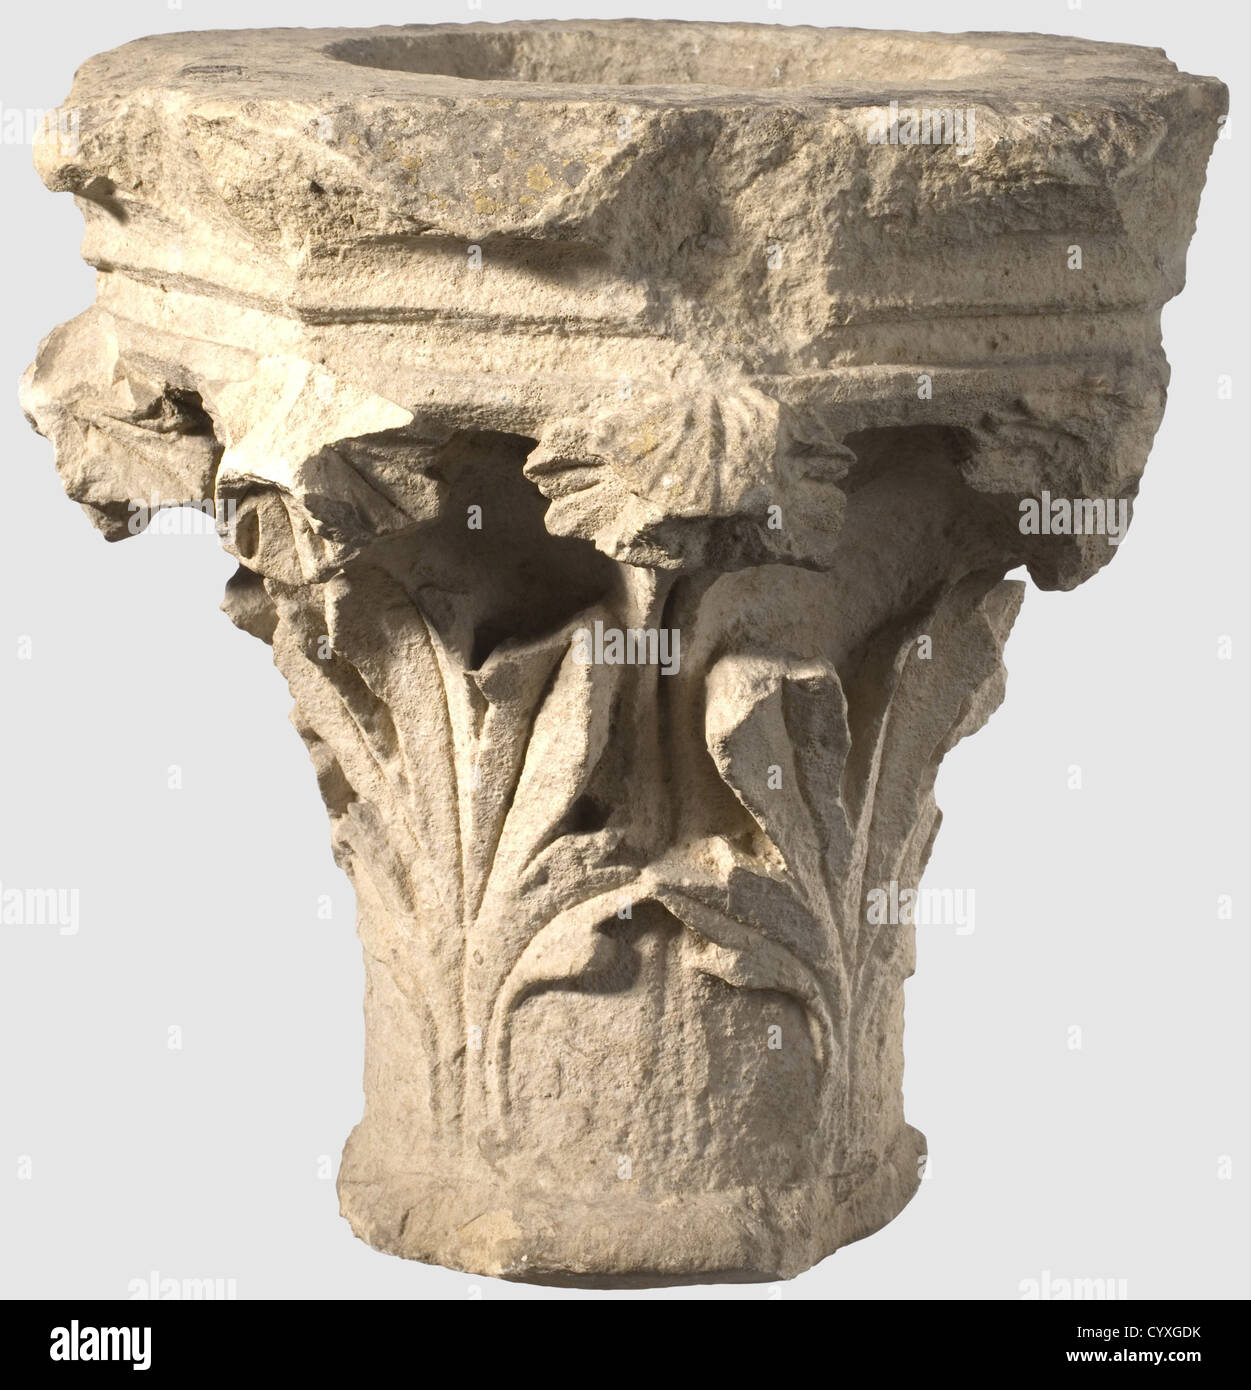 A French Gothic sandstone capital, 14th/15th century A light gray sandstone column capital in three-quarter relief. Surrounded by decorative acanthus with a stepped octagonal base and bowl-shaped top. Height 29 cm, historic, historical, 15th century, 14th century, handicrafts, handcraft, craft, object, objects, stills, clipping, clippings, cut out, cut-out, cut-outs, fine arts, art, artful, Additional-Rights-Clearences-Not Available Stock Photo